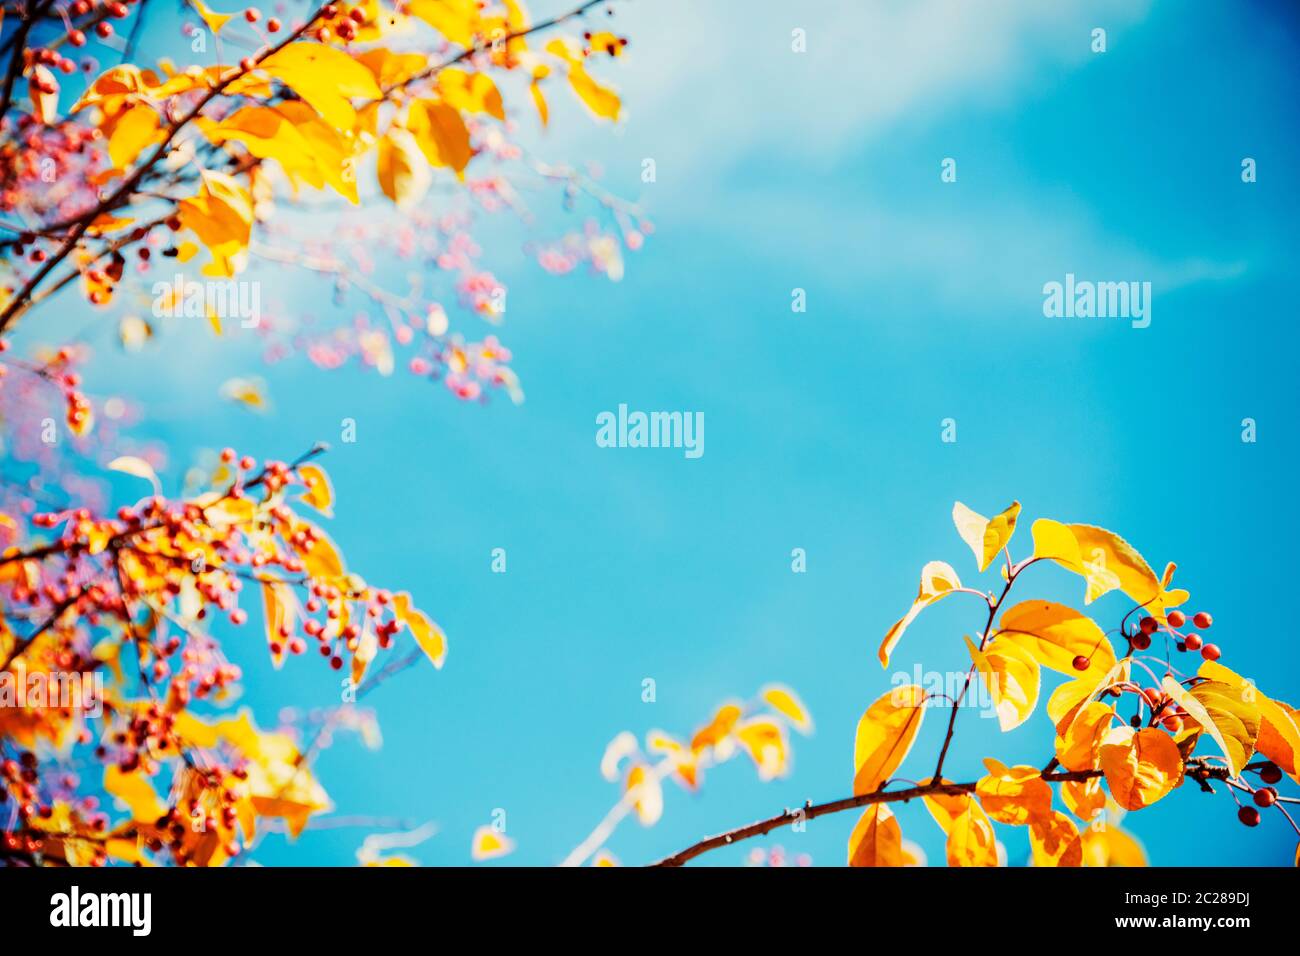 Autumn tree leaves over blue sky background Stock Photo